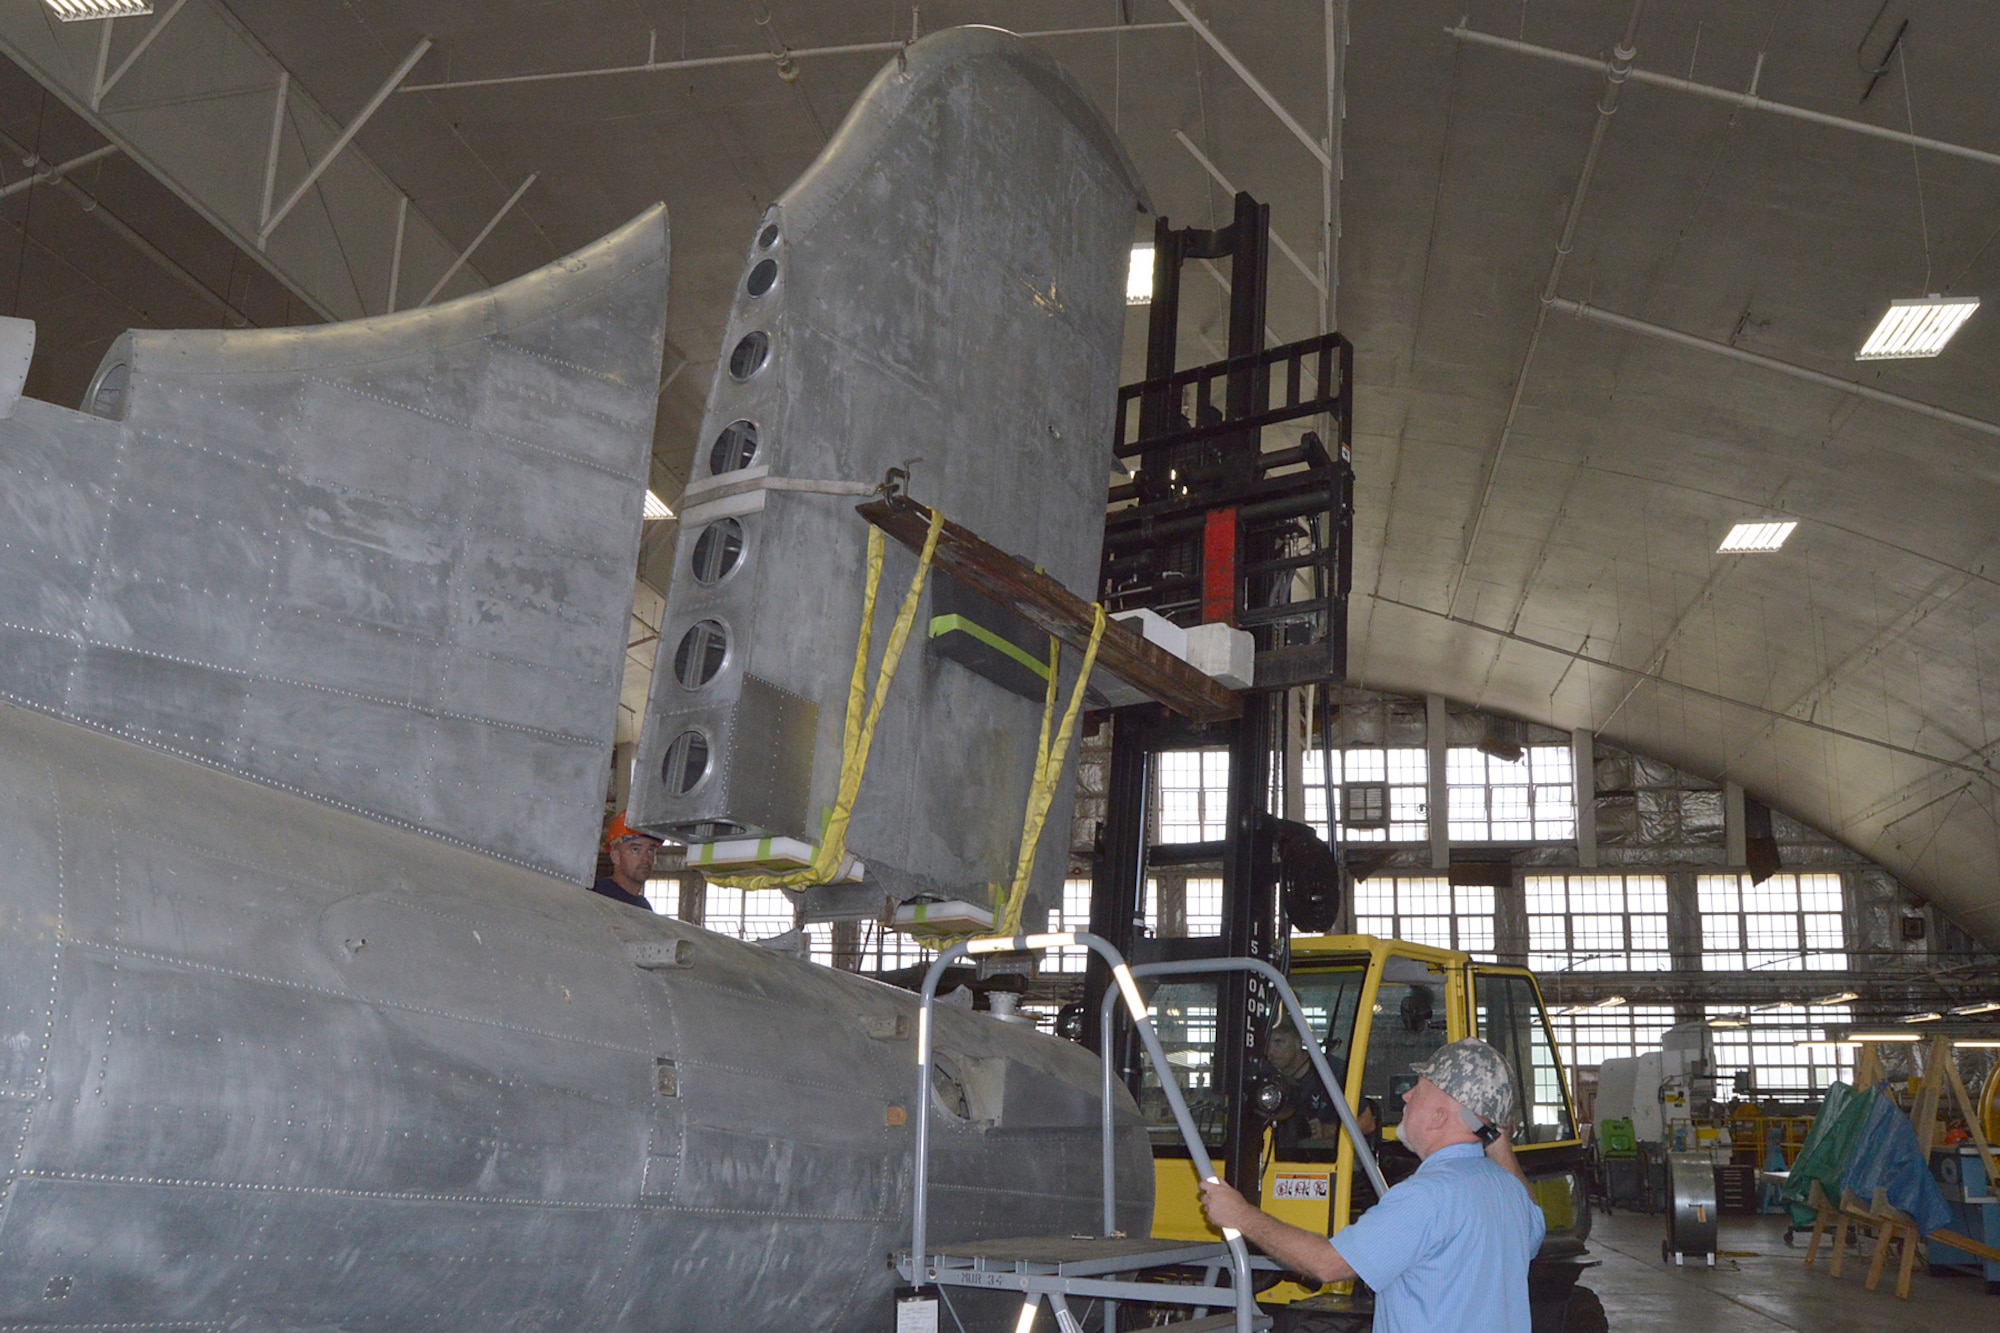 DAYTON, Ohio (08/2014) -- (From left to right) Restoration Specialists Duane Jones, Chad Vanhook, and Roger Brigner attach the vertical stabilizer to the fuselage of the B-17F "Memphis Belle"® at the museum's restoration hangar. Plans call for the aircraft to be placed on display in the museum's World War II Gallery in spring 2018. (U.S. Air Force photo)